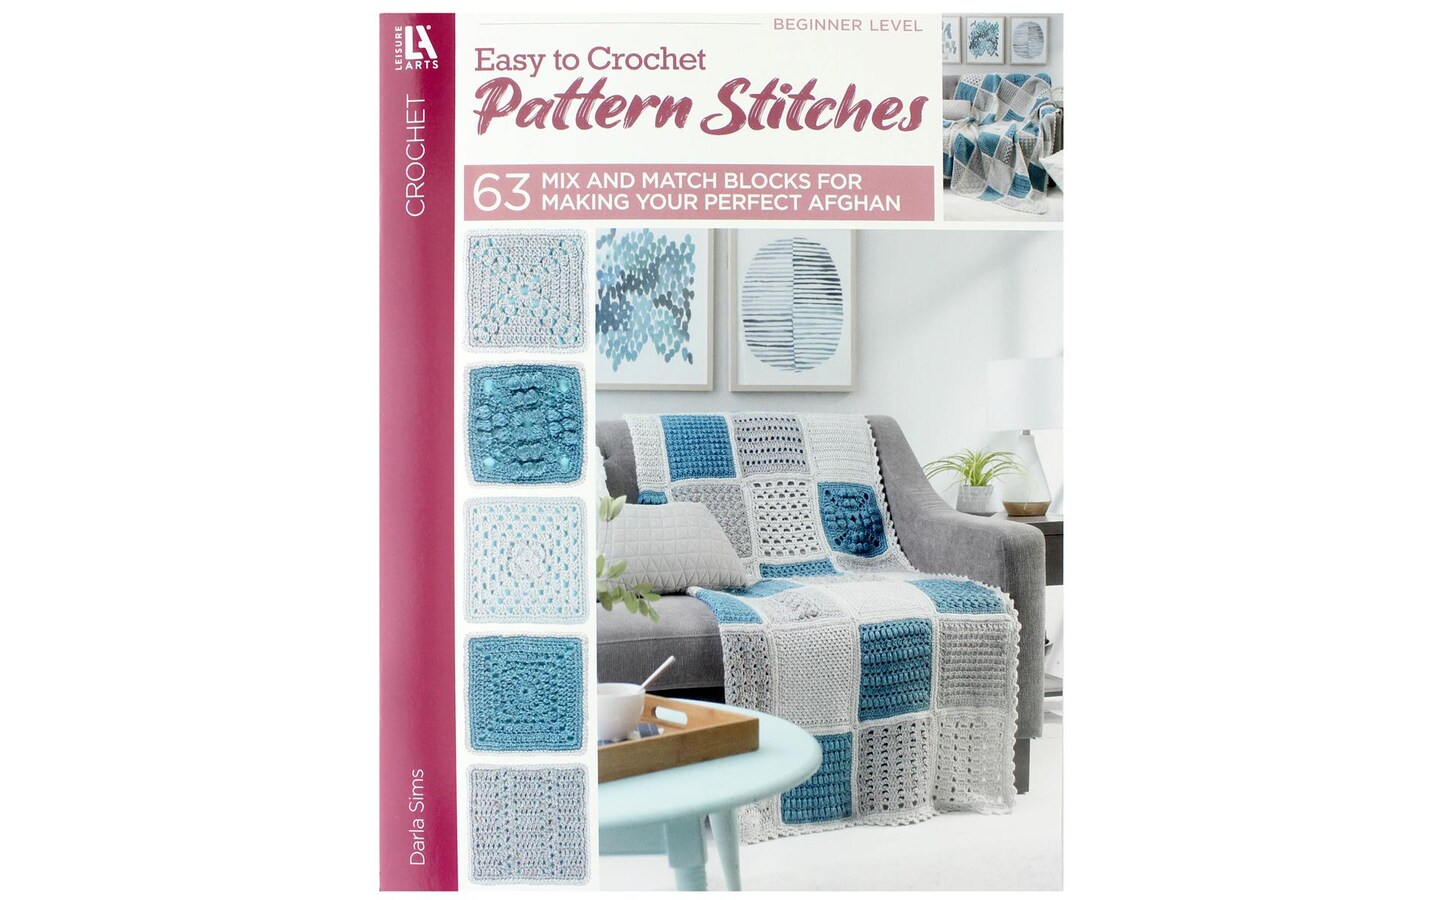 Crochet Projects: 20 Fabulous Crochet Baskets, Lapthrows, and Dishcloths  For Your Lovely Home: (tunisian crochet books, crochet pattern books,  crochet projects) by Adrienne Sun